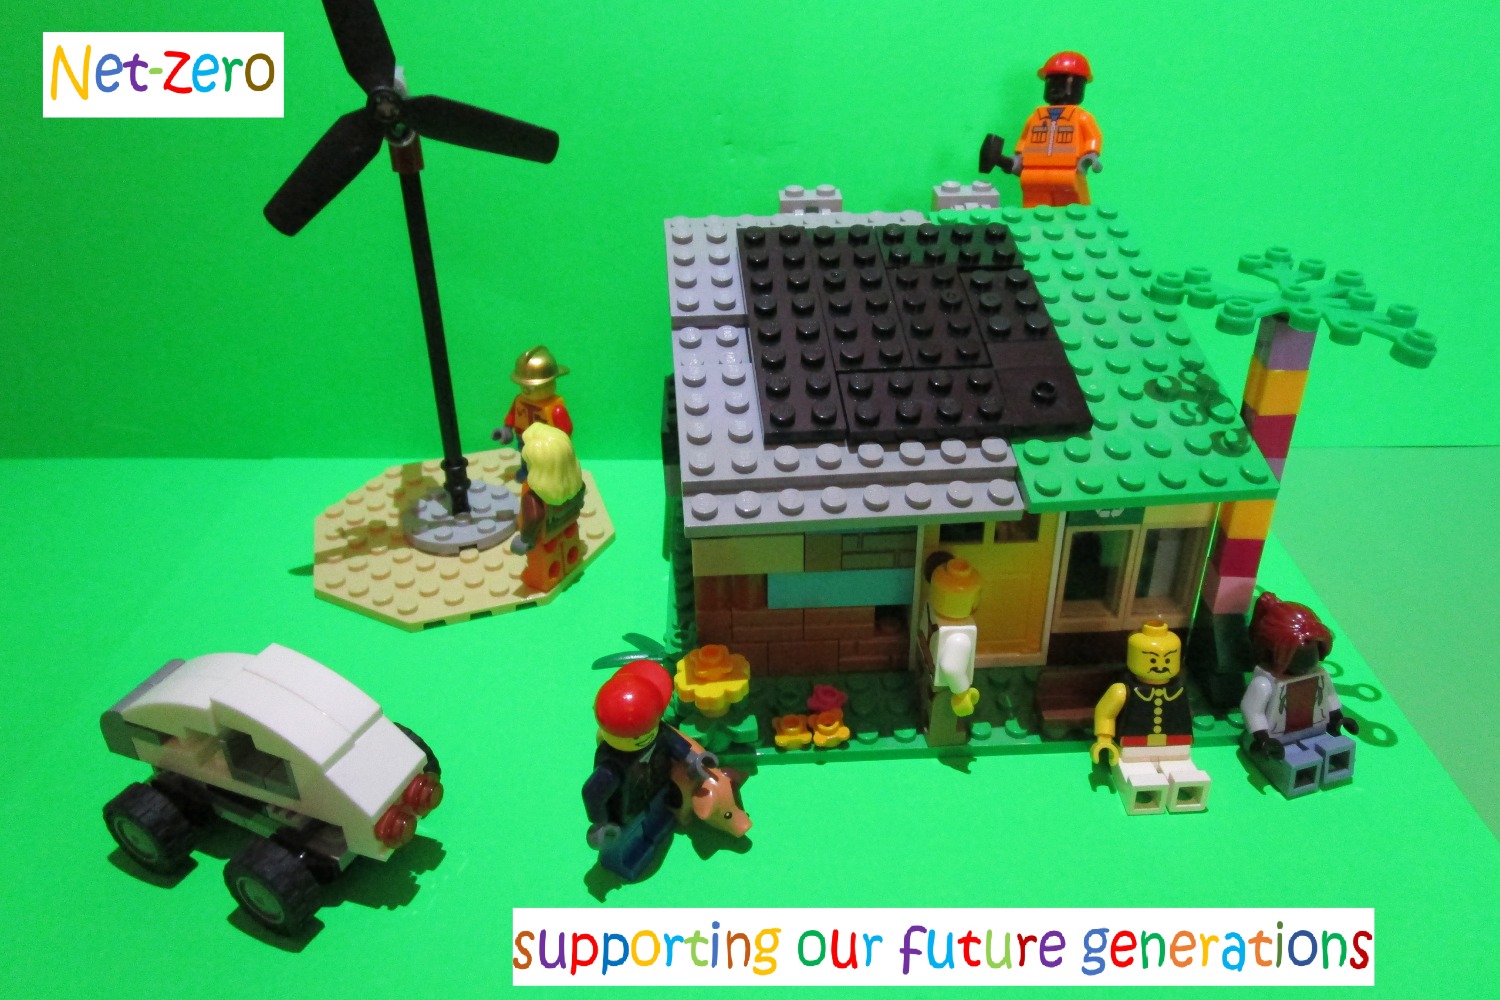 Lego build of a content, relaxed family life in a net zero future